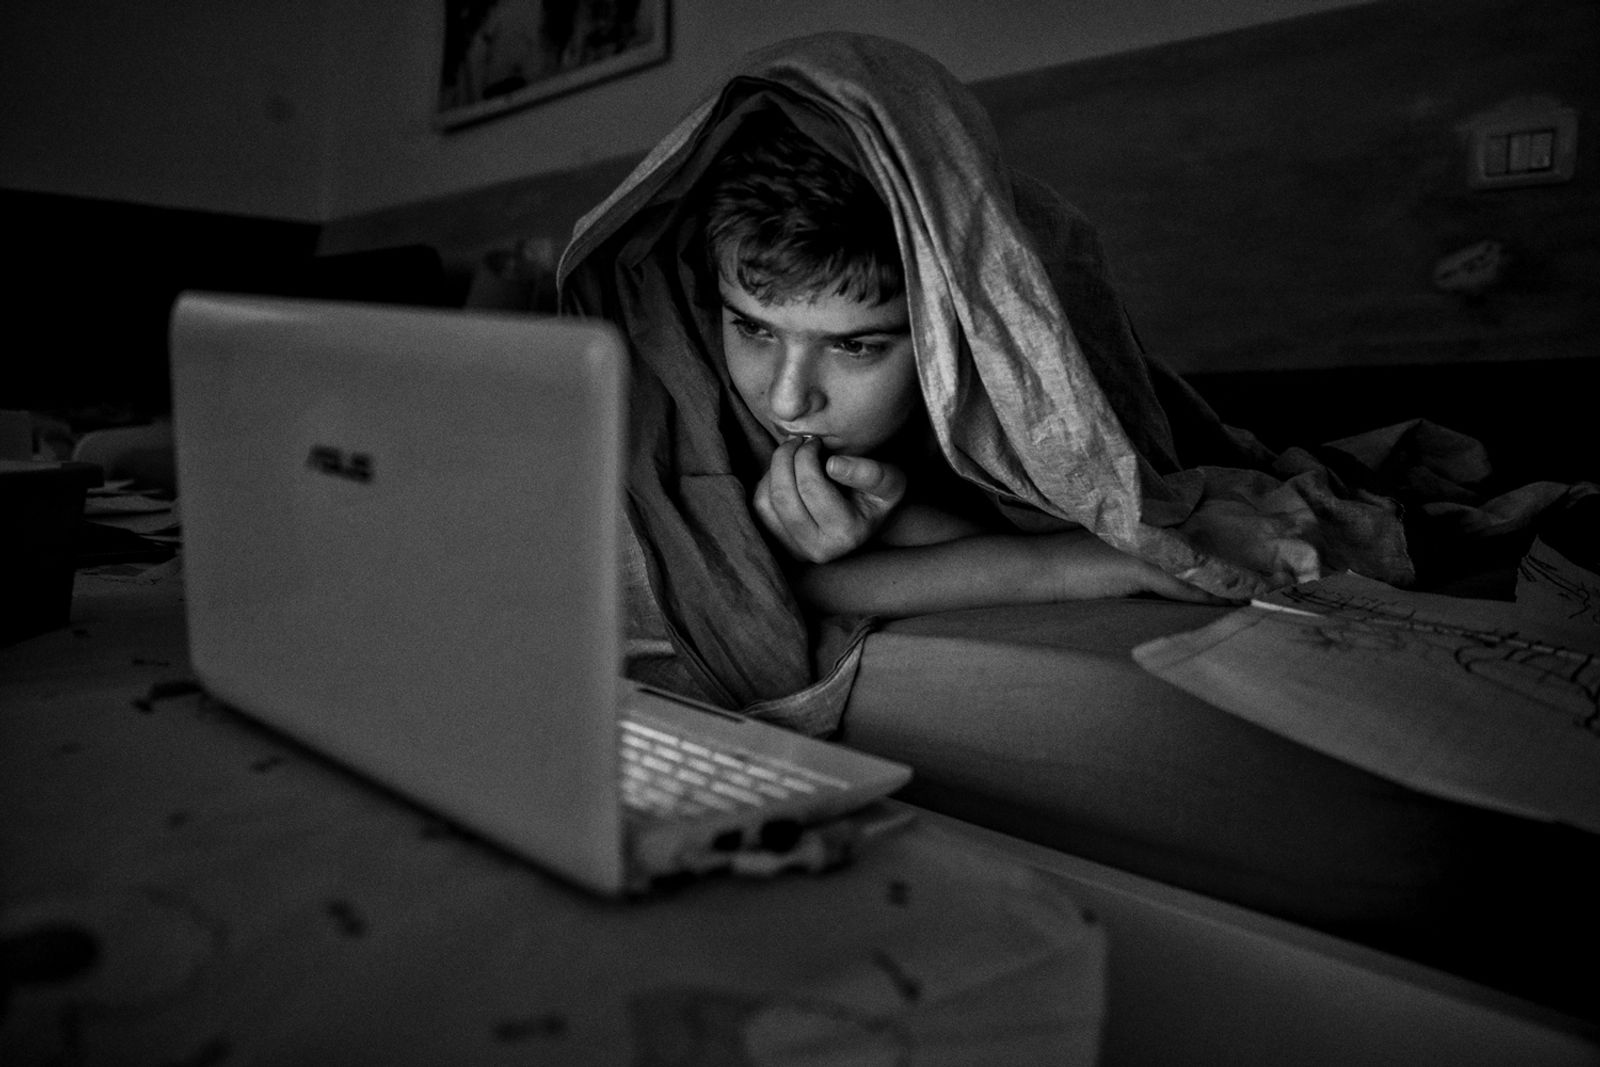 © BARBARA ZANON - Perugia, July 2018: Riccardo (12) watches videos on youtube in his bed before sleeping